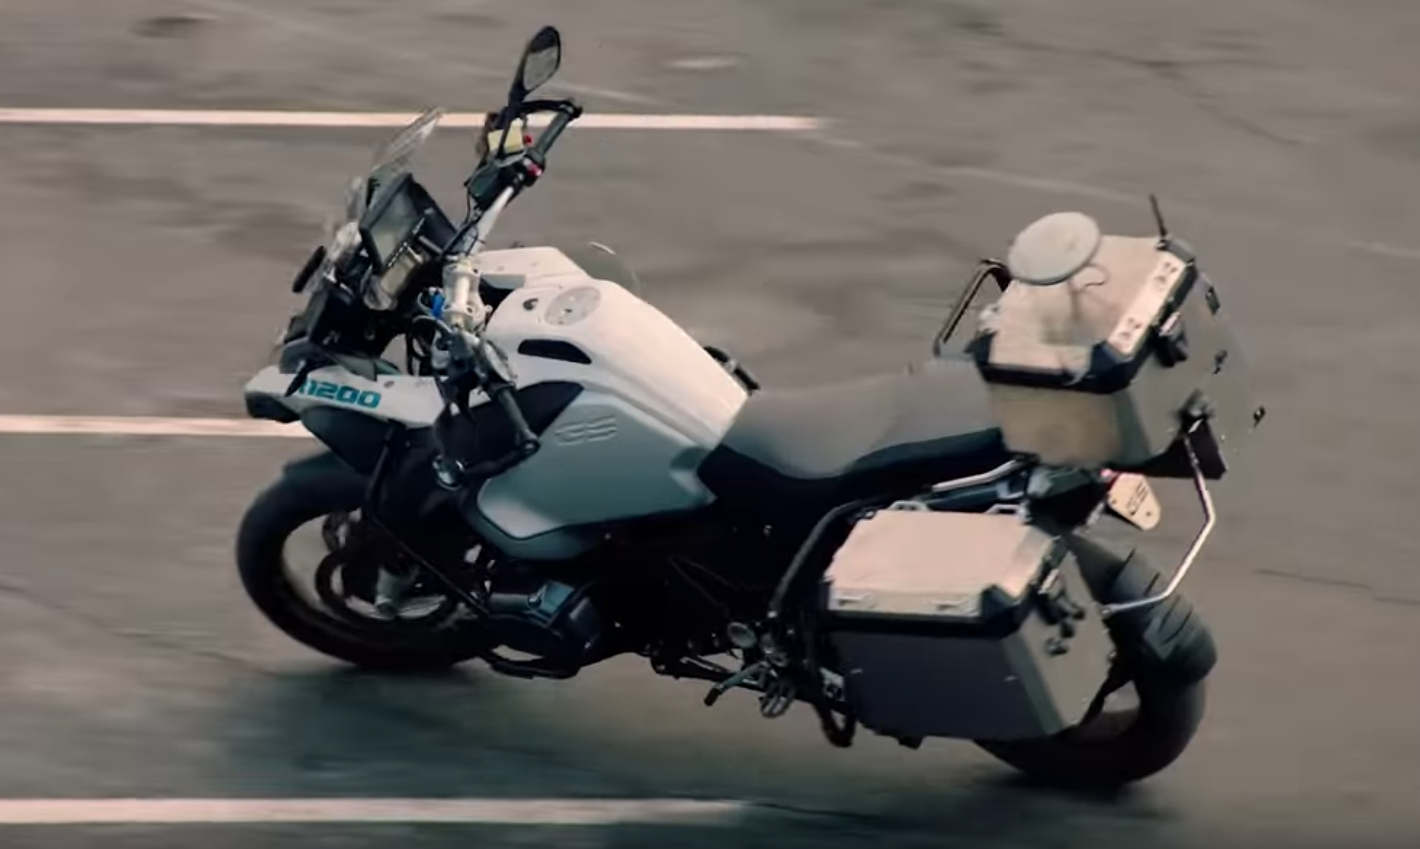 BMW Self-Riding motorcycle in a video